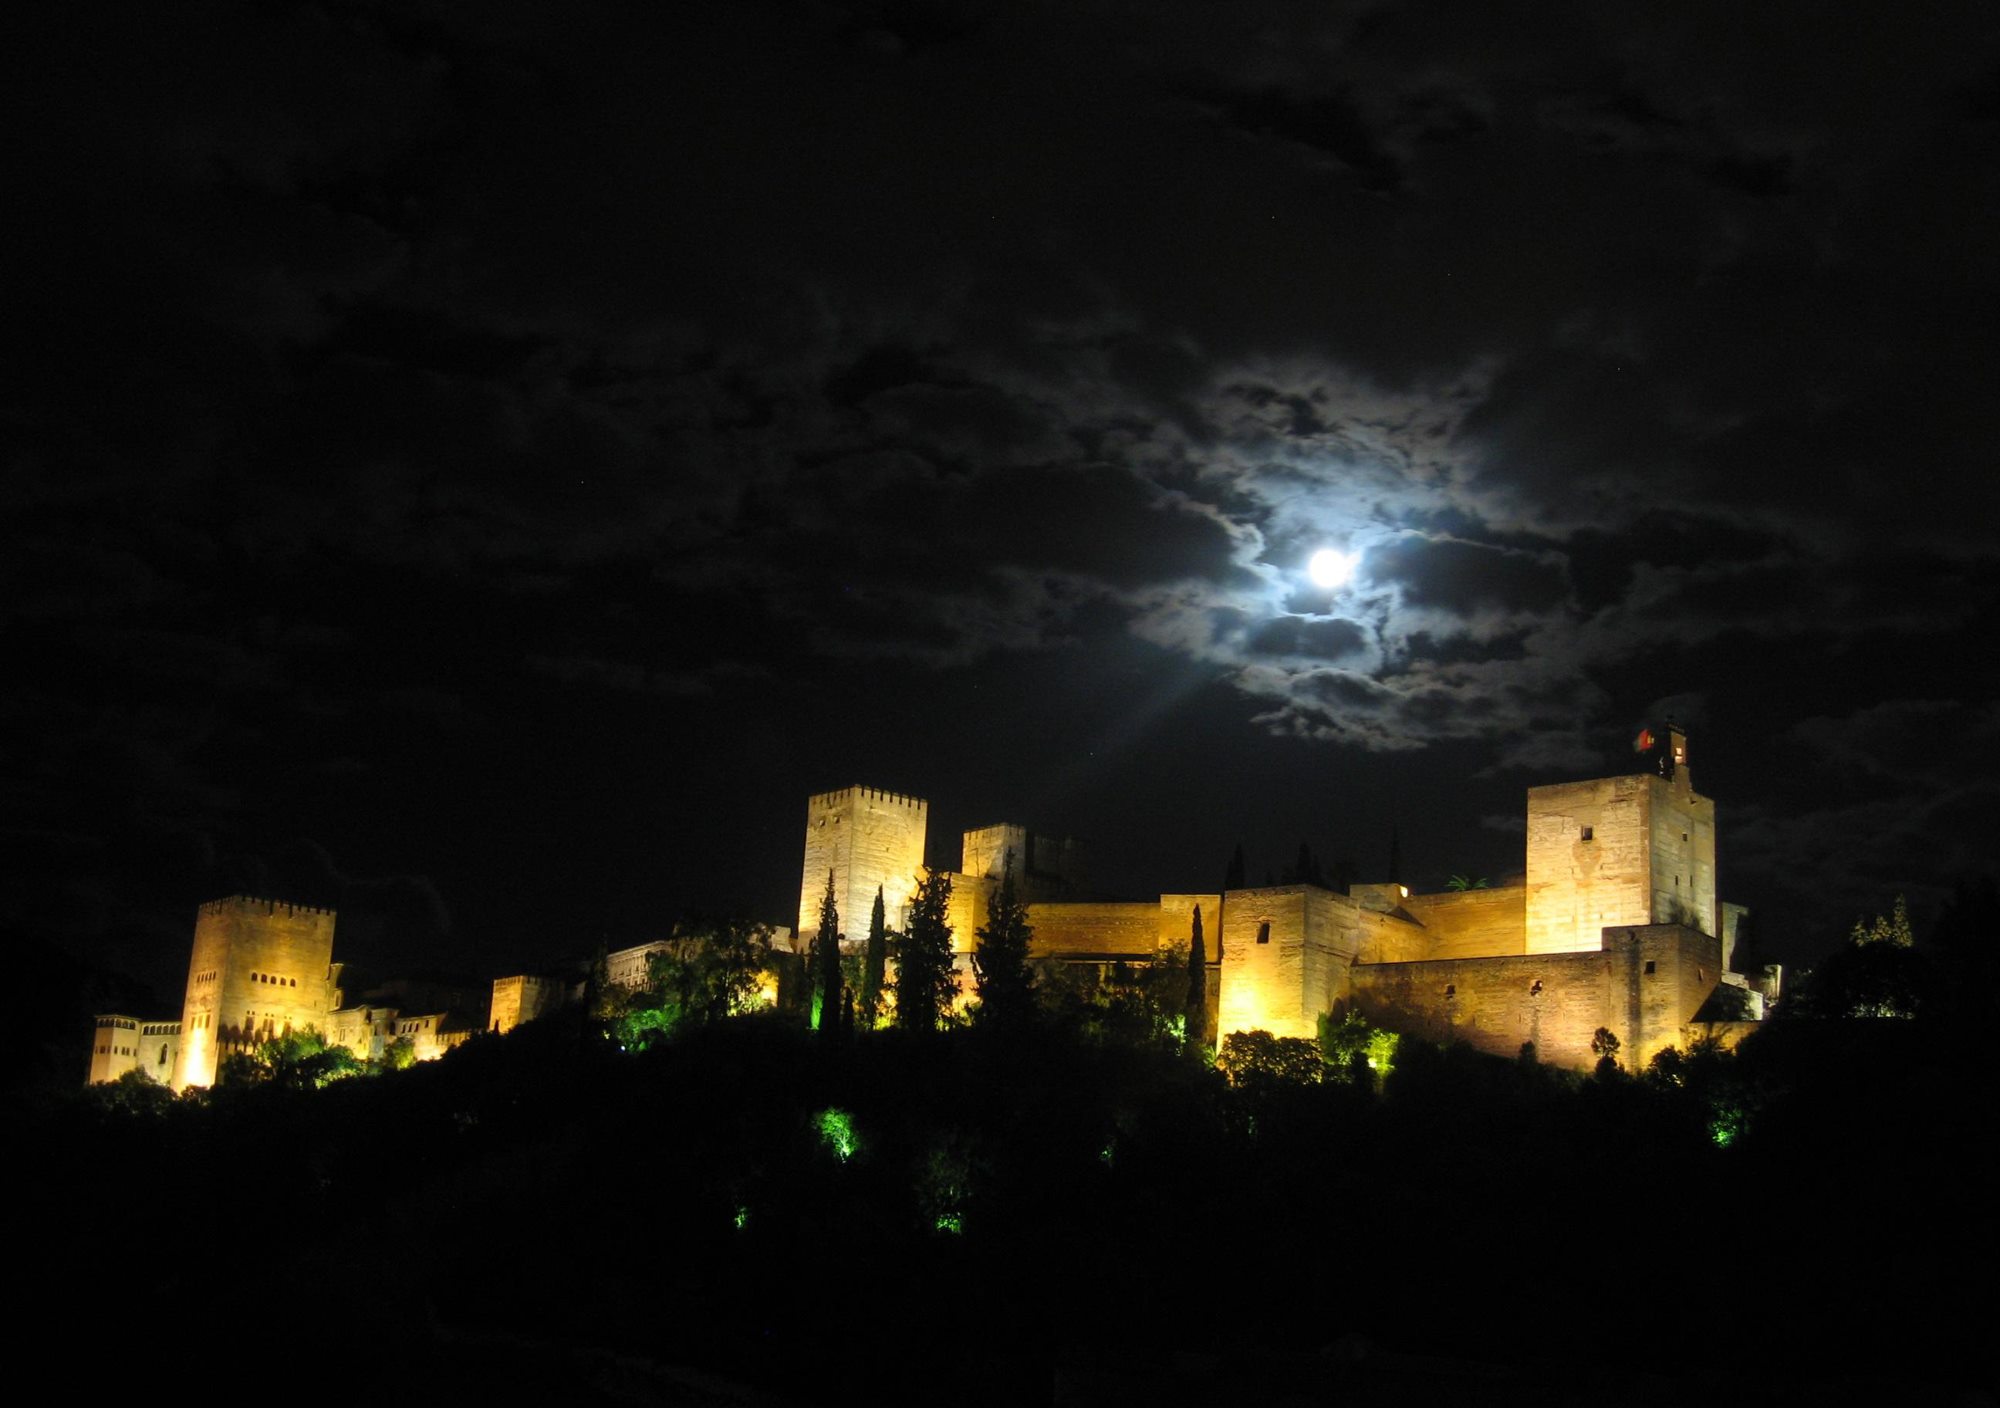 http://www.travelhouse.es/images/visits-tours-in-spain/granada/booking-book-online-get-purchase-buy-tickets-Night-Visits-tours-to-the-Alhambra-Nasrid-Palaces-granada%20(1).jpg